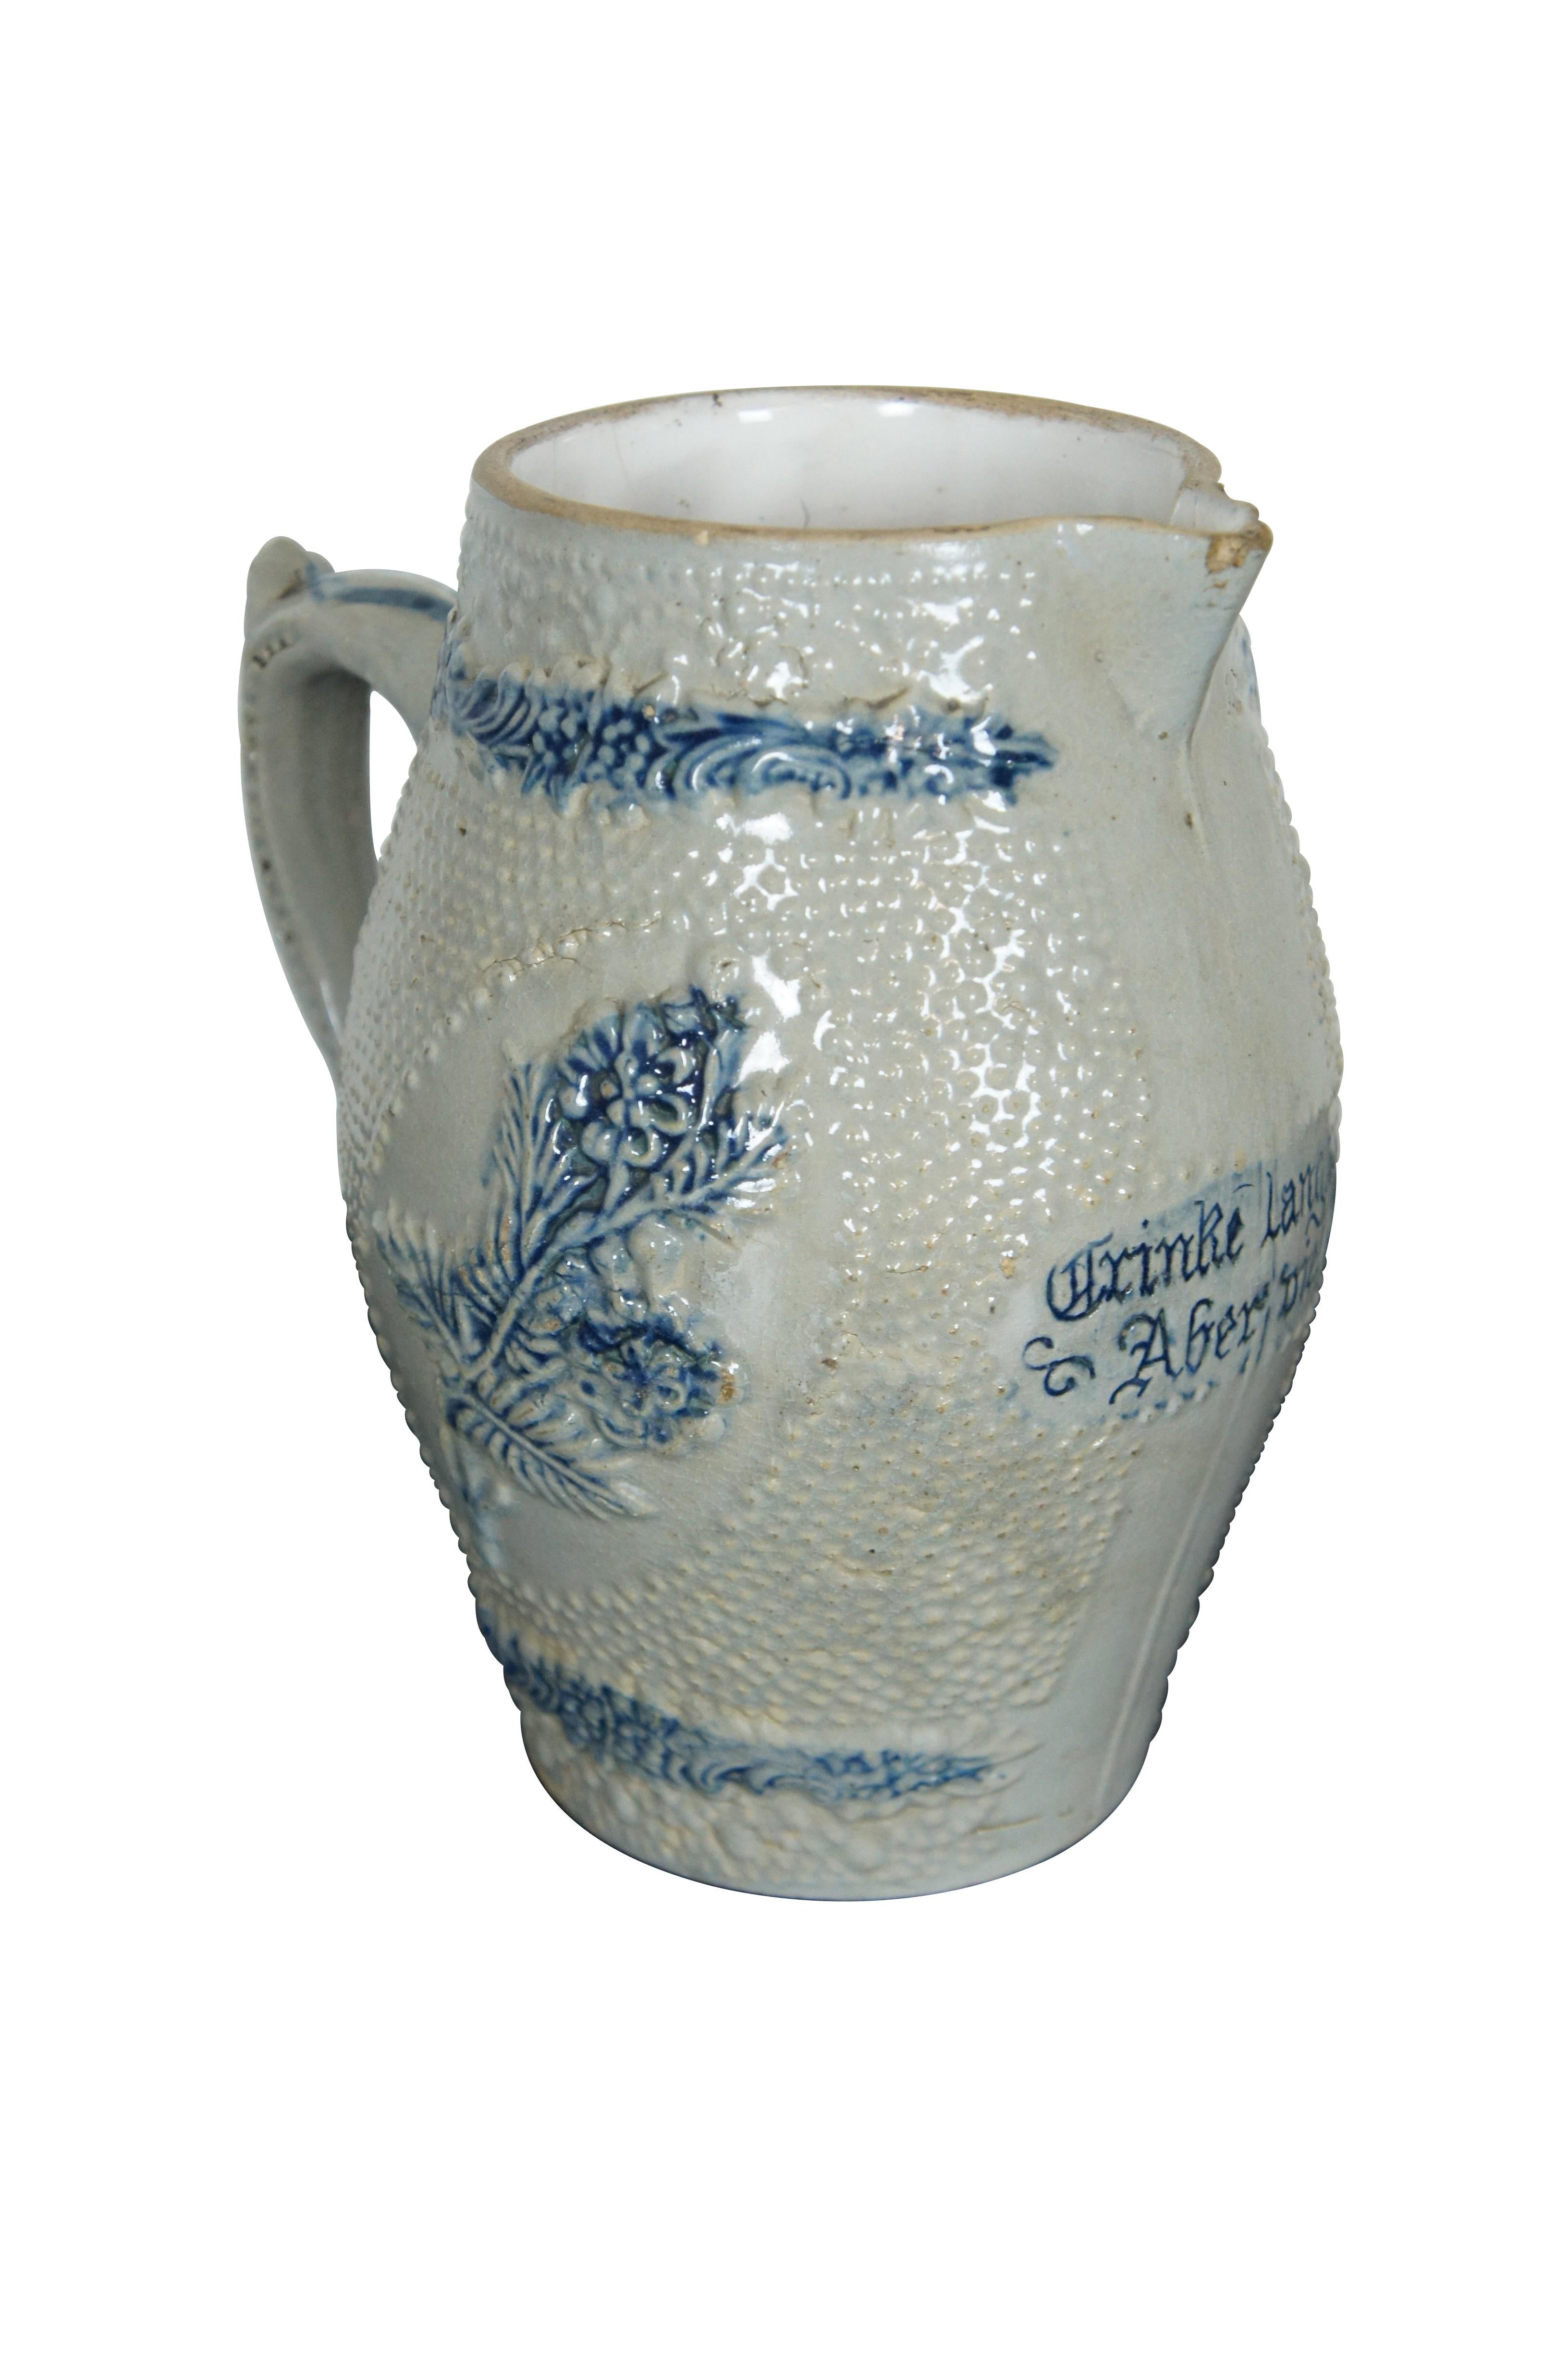 An early Whites Utica Prosit. Stoneware Pitcher with embossed lettering. Text reads: Grinke langsam. Aber viel! Translation grin slowly. but much

Whites of Utica
Utica, New York State. United States.

Hersteller / Manufacturer

Noah White began